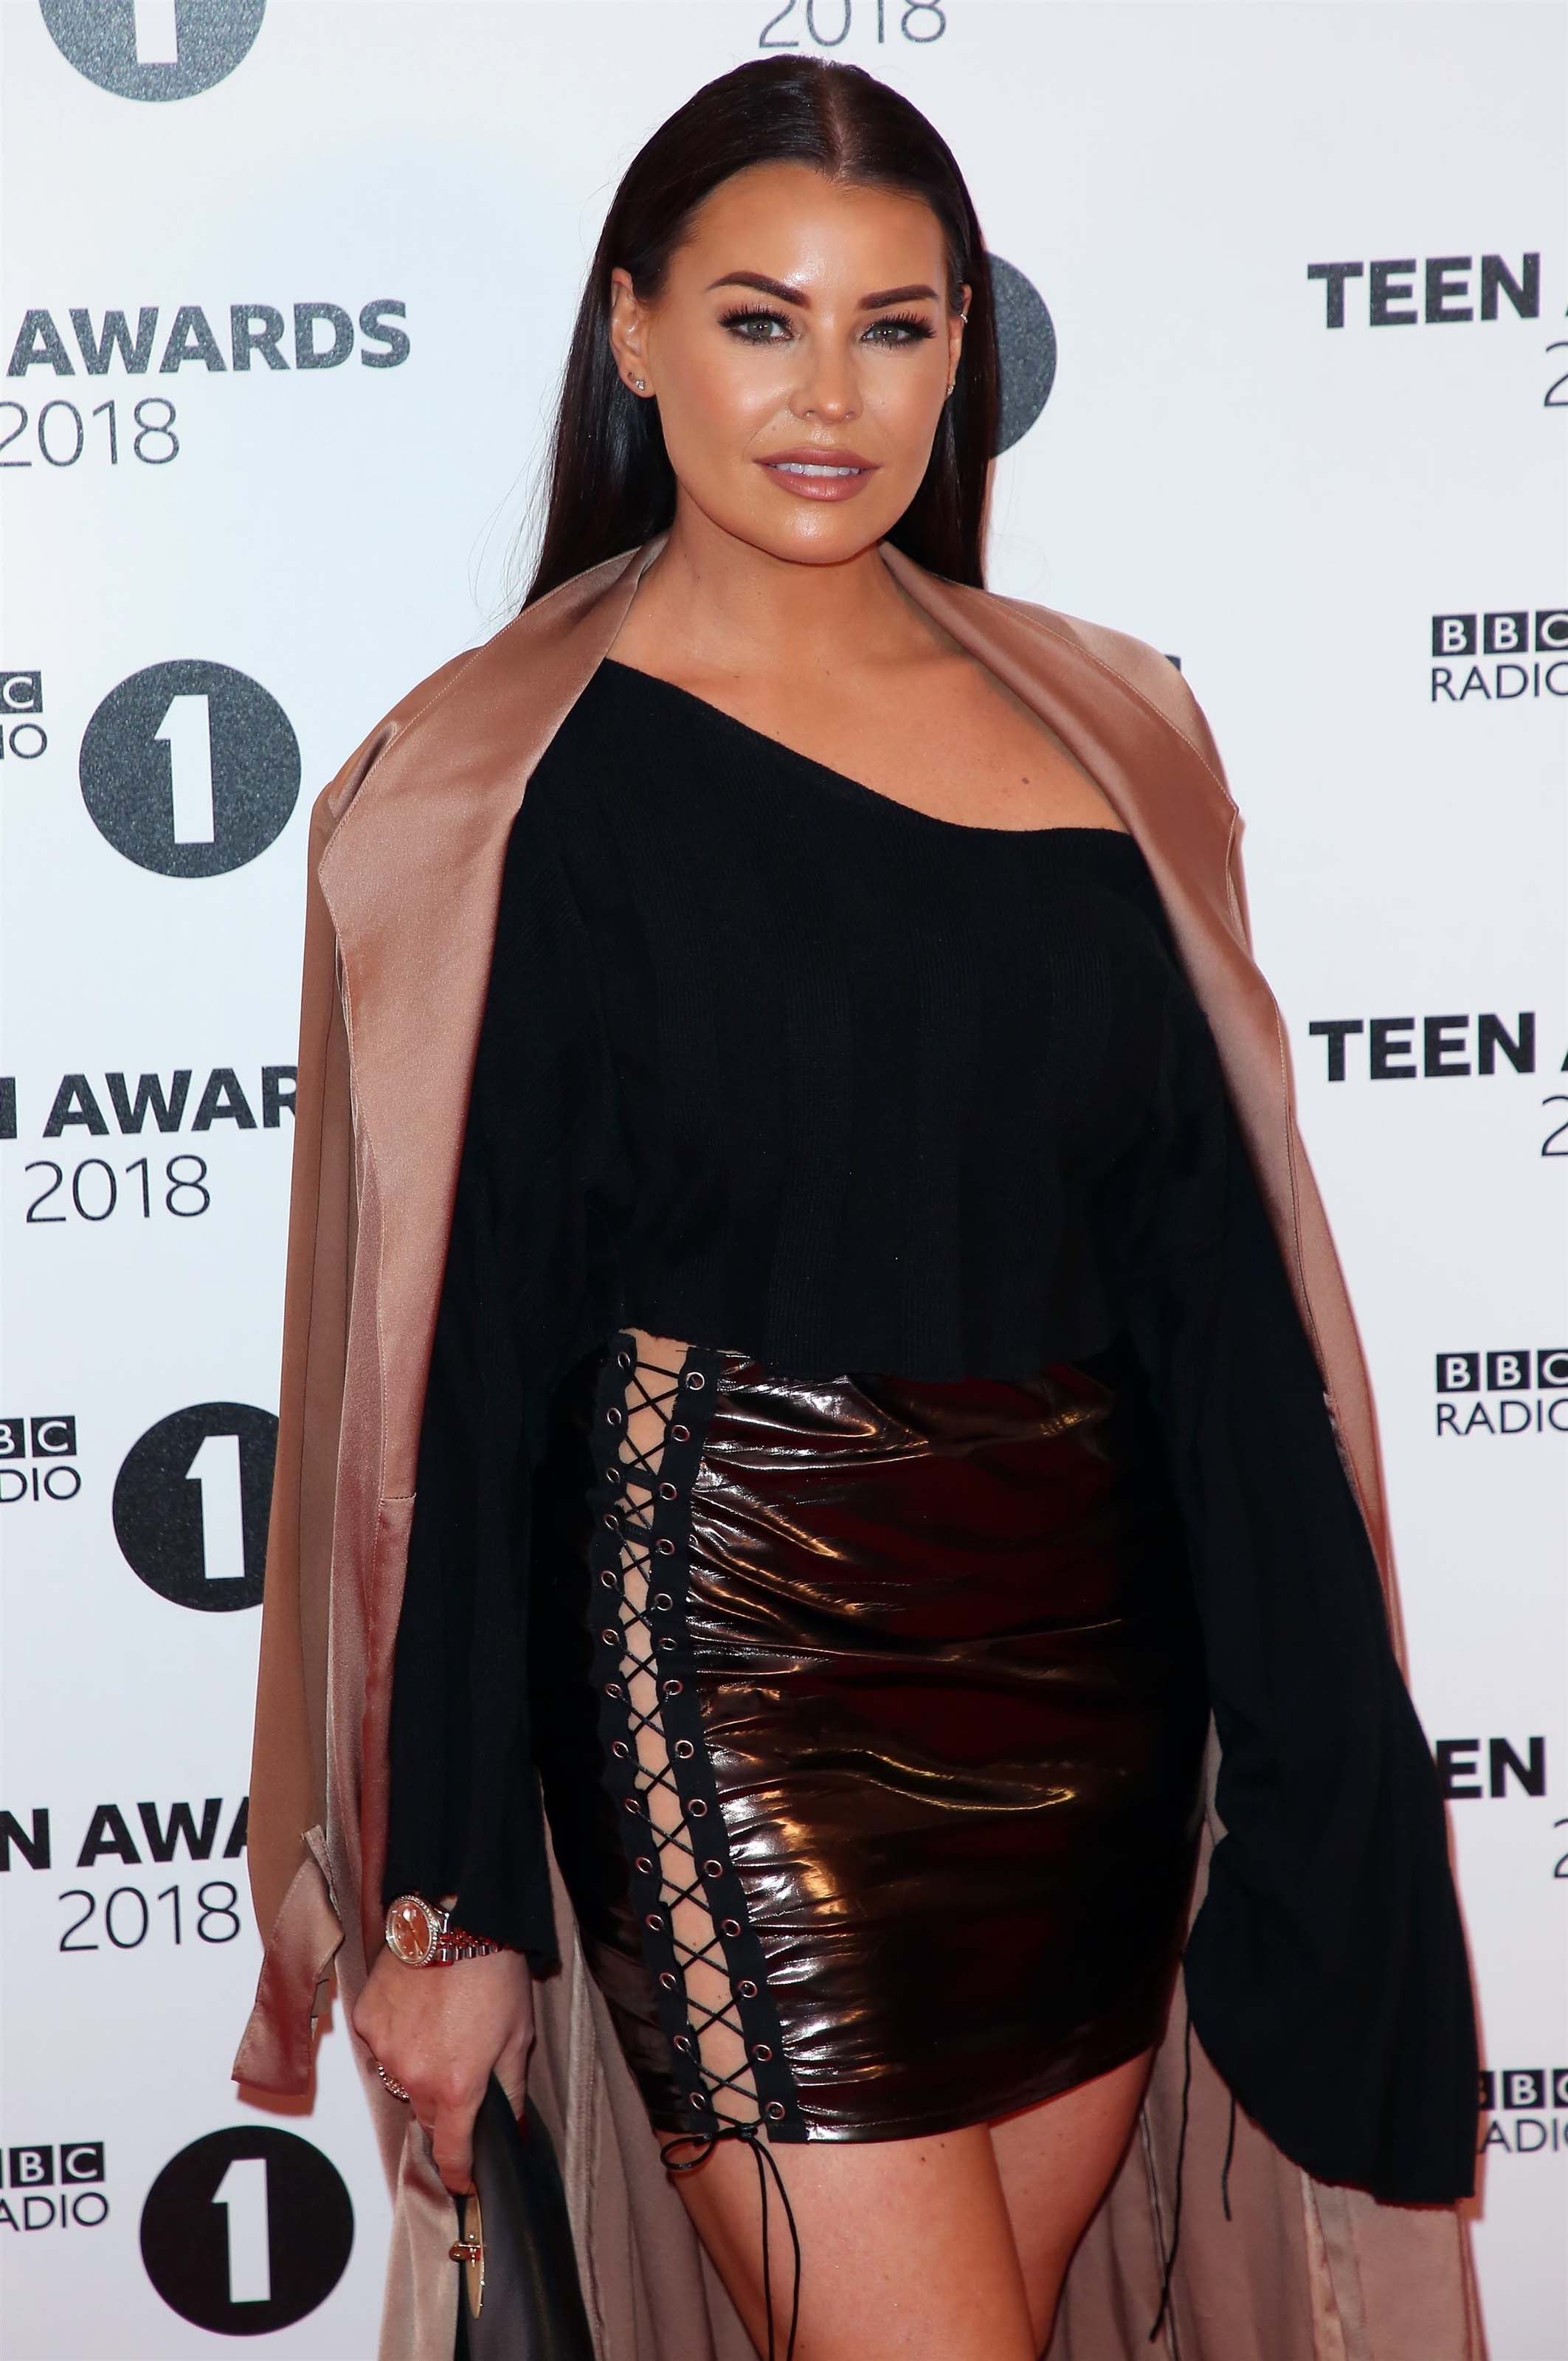 Jessica Wright attends The BBC Teen Awards 2018